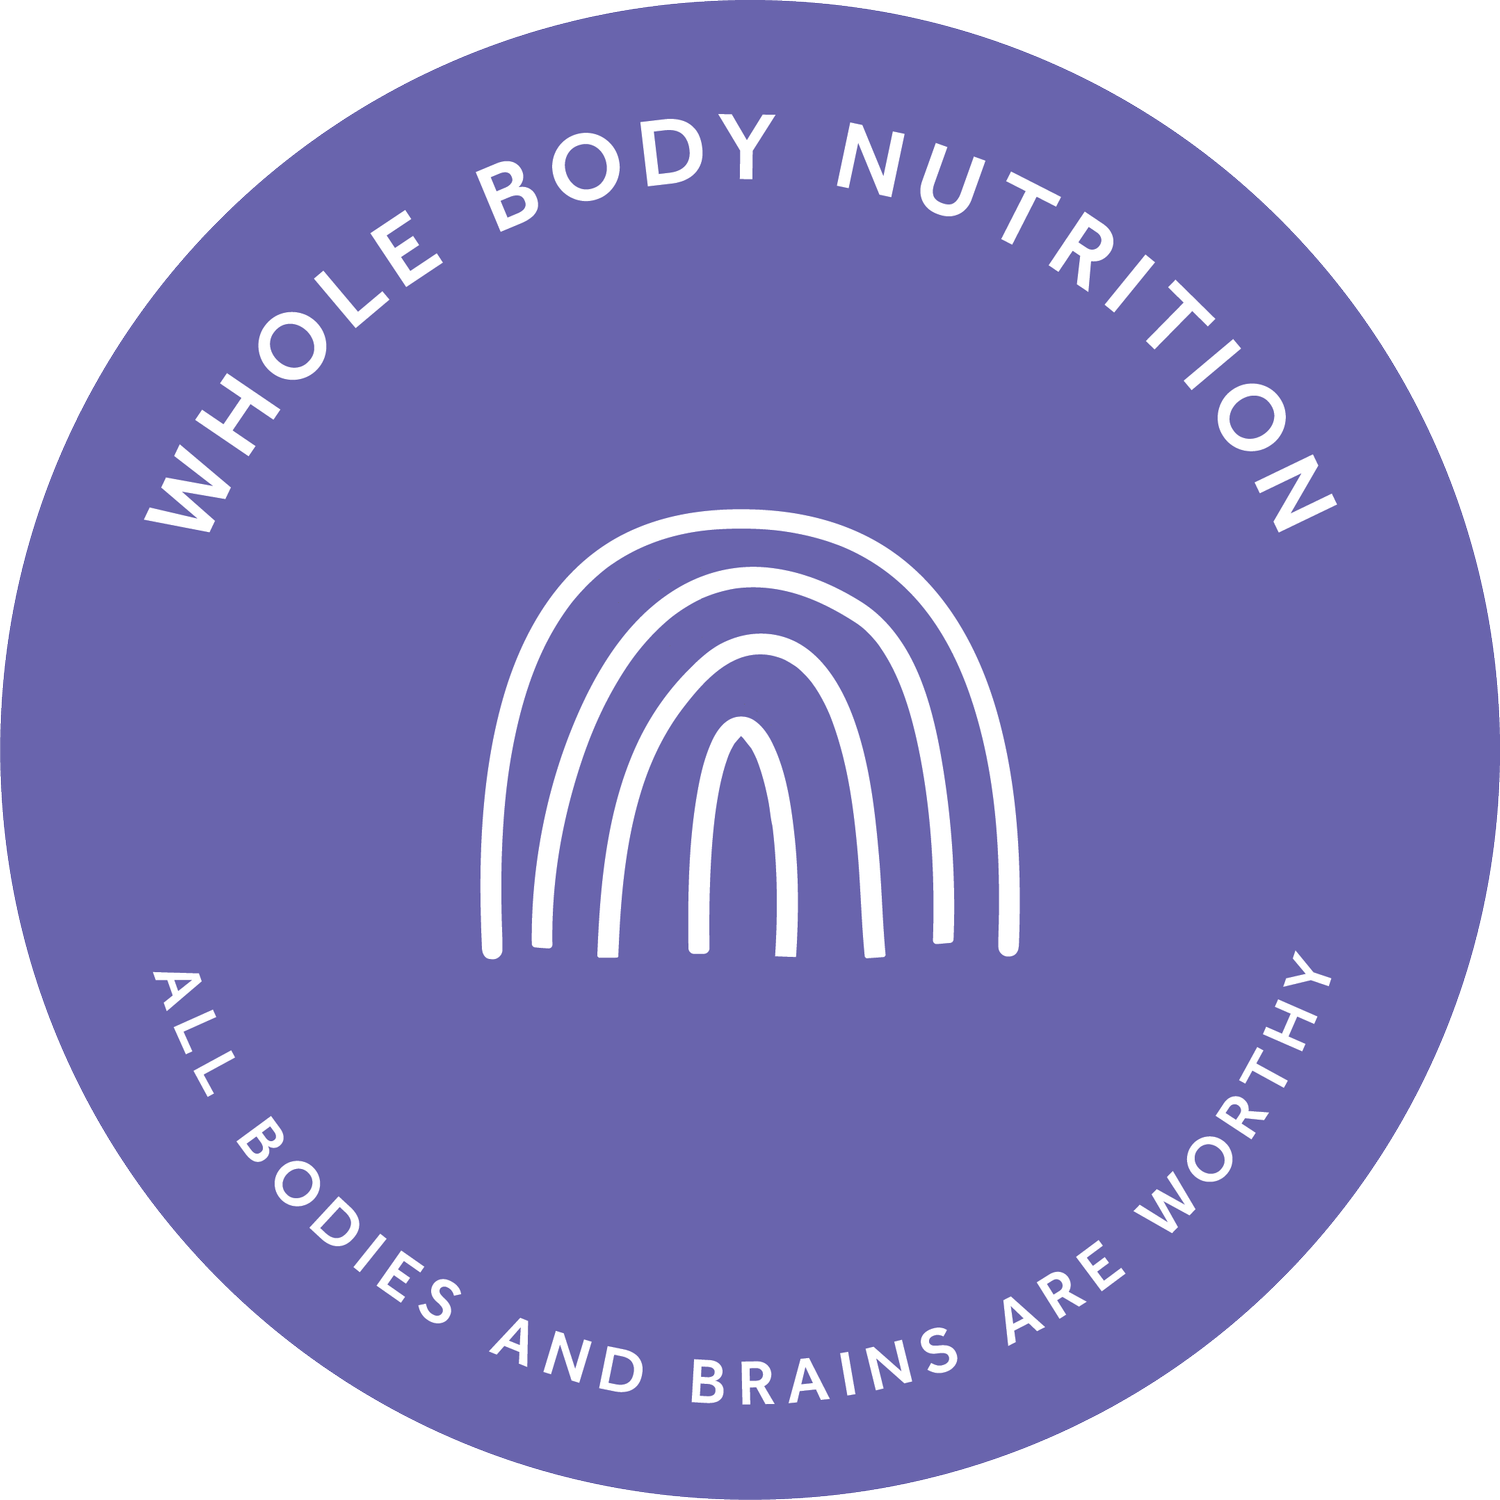 Whole Body Nutrition - Margo White Clinical Nutritionist